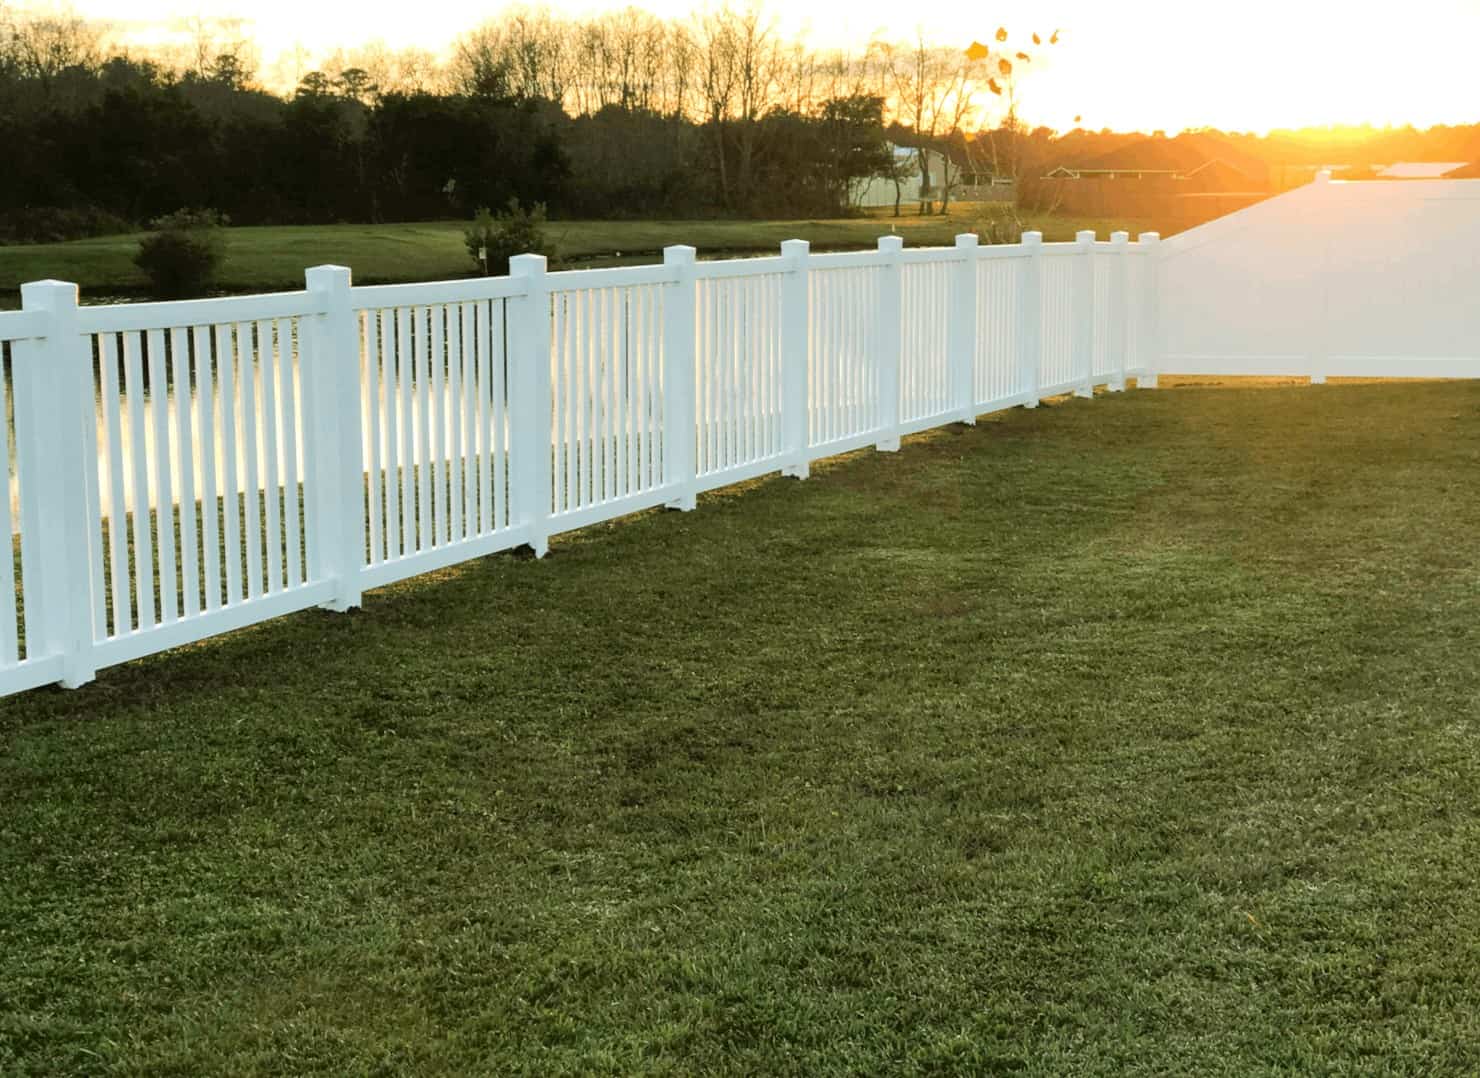 Greenville Fence Installation and Fence Company (864) 502-1613